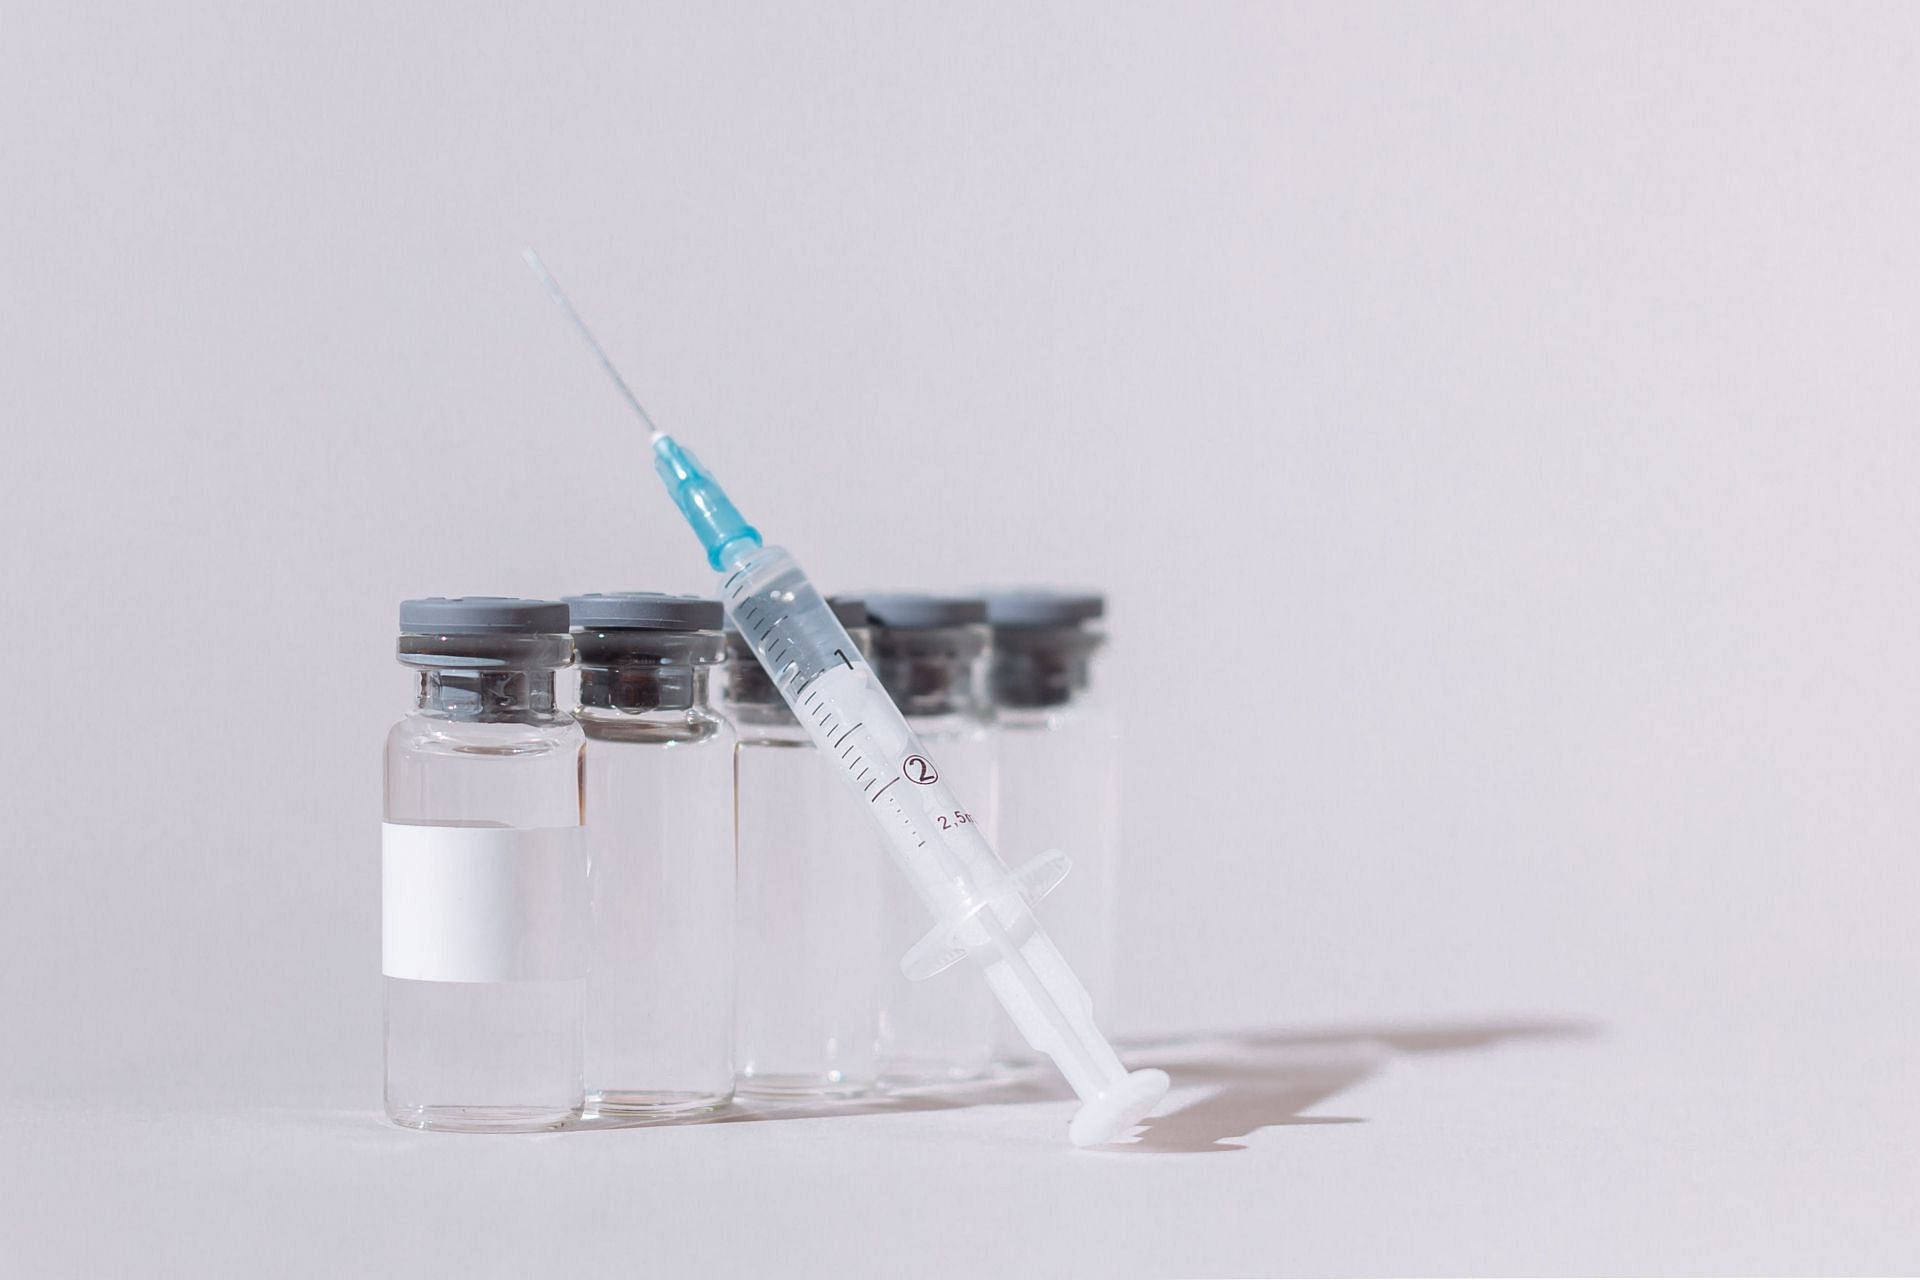 Syringes representative image with vaccine bottles